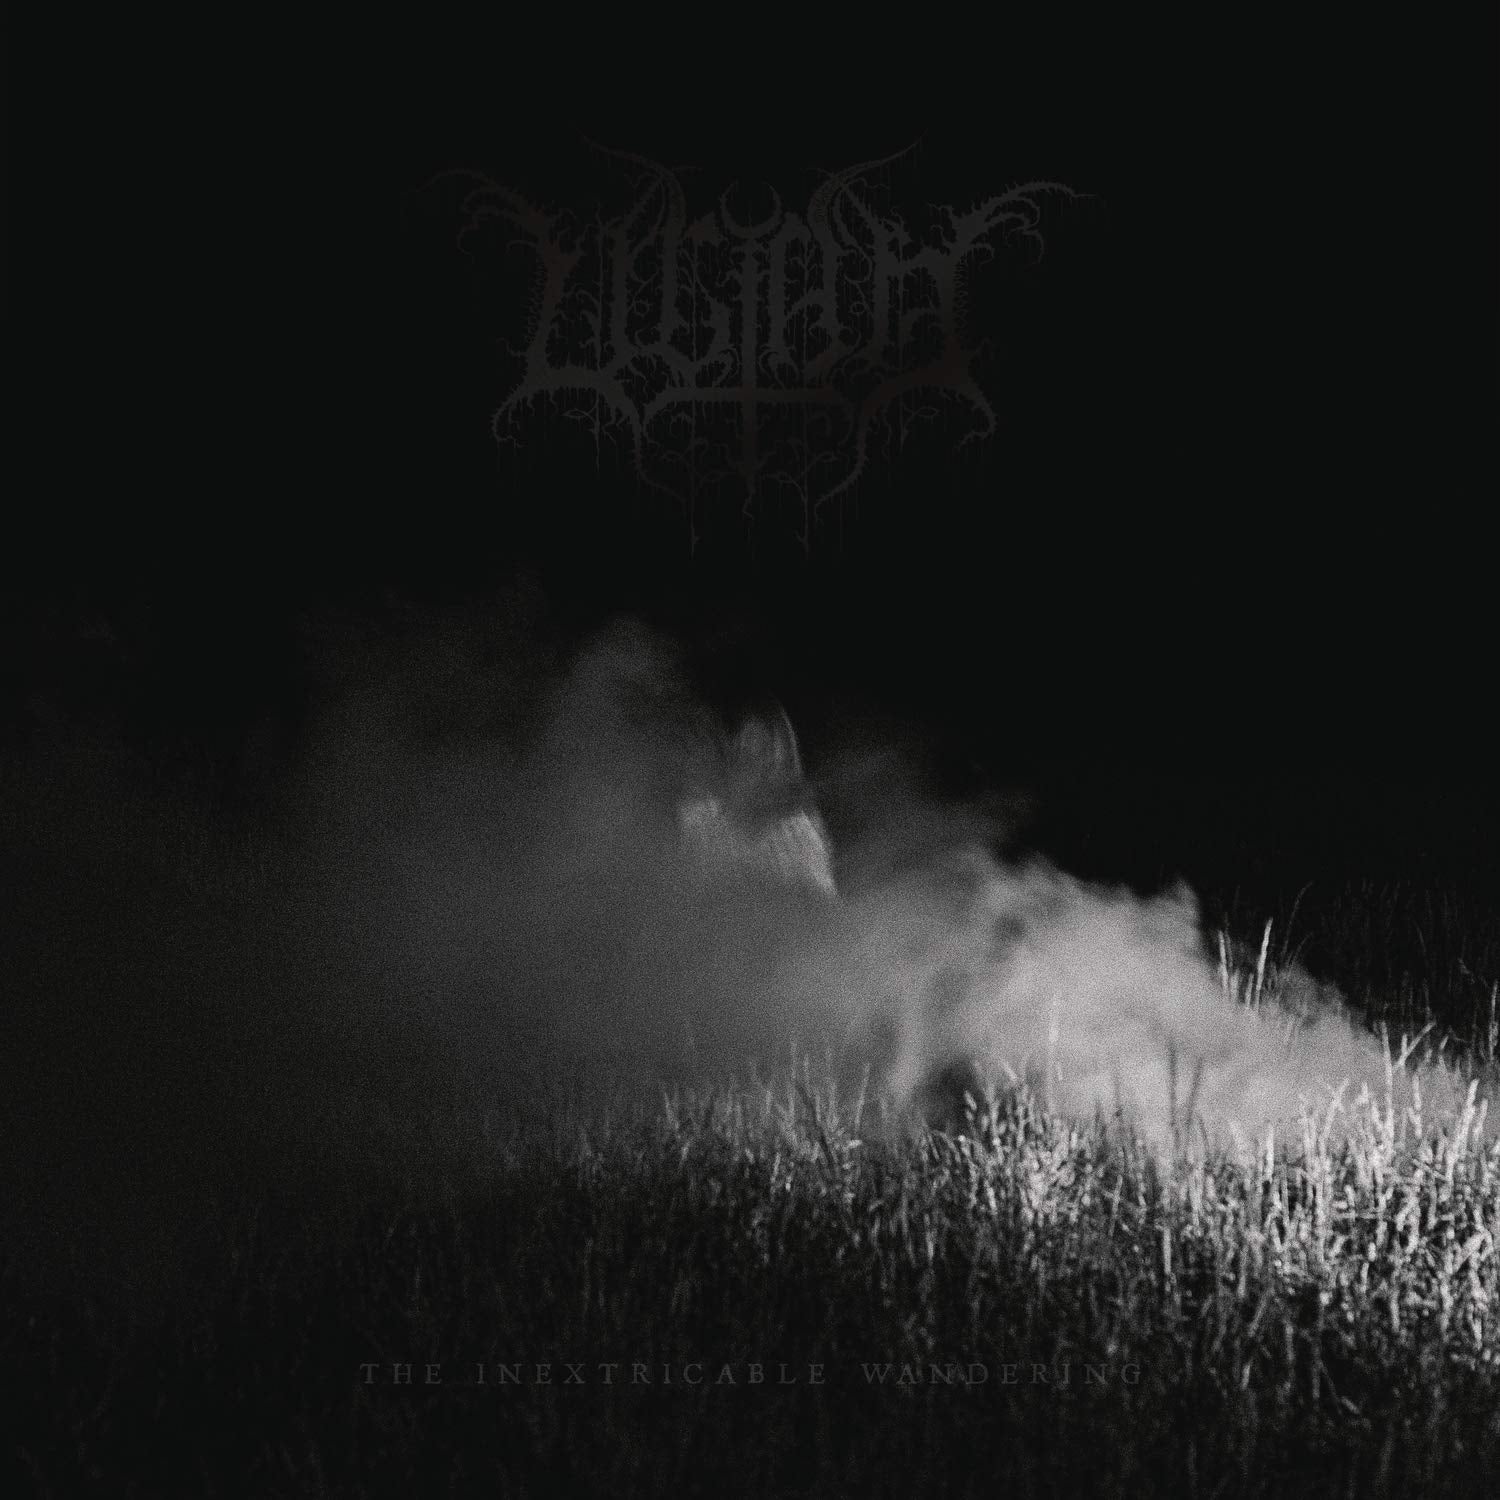 ULTHA "The Inextricable Wandering" 2xLP